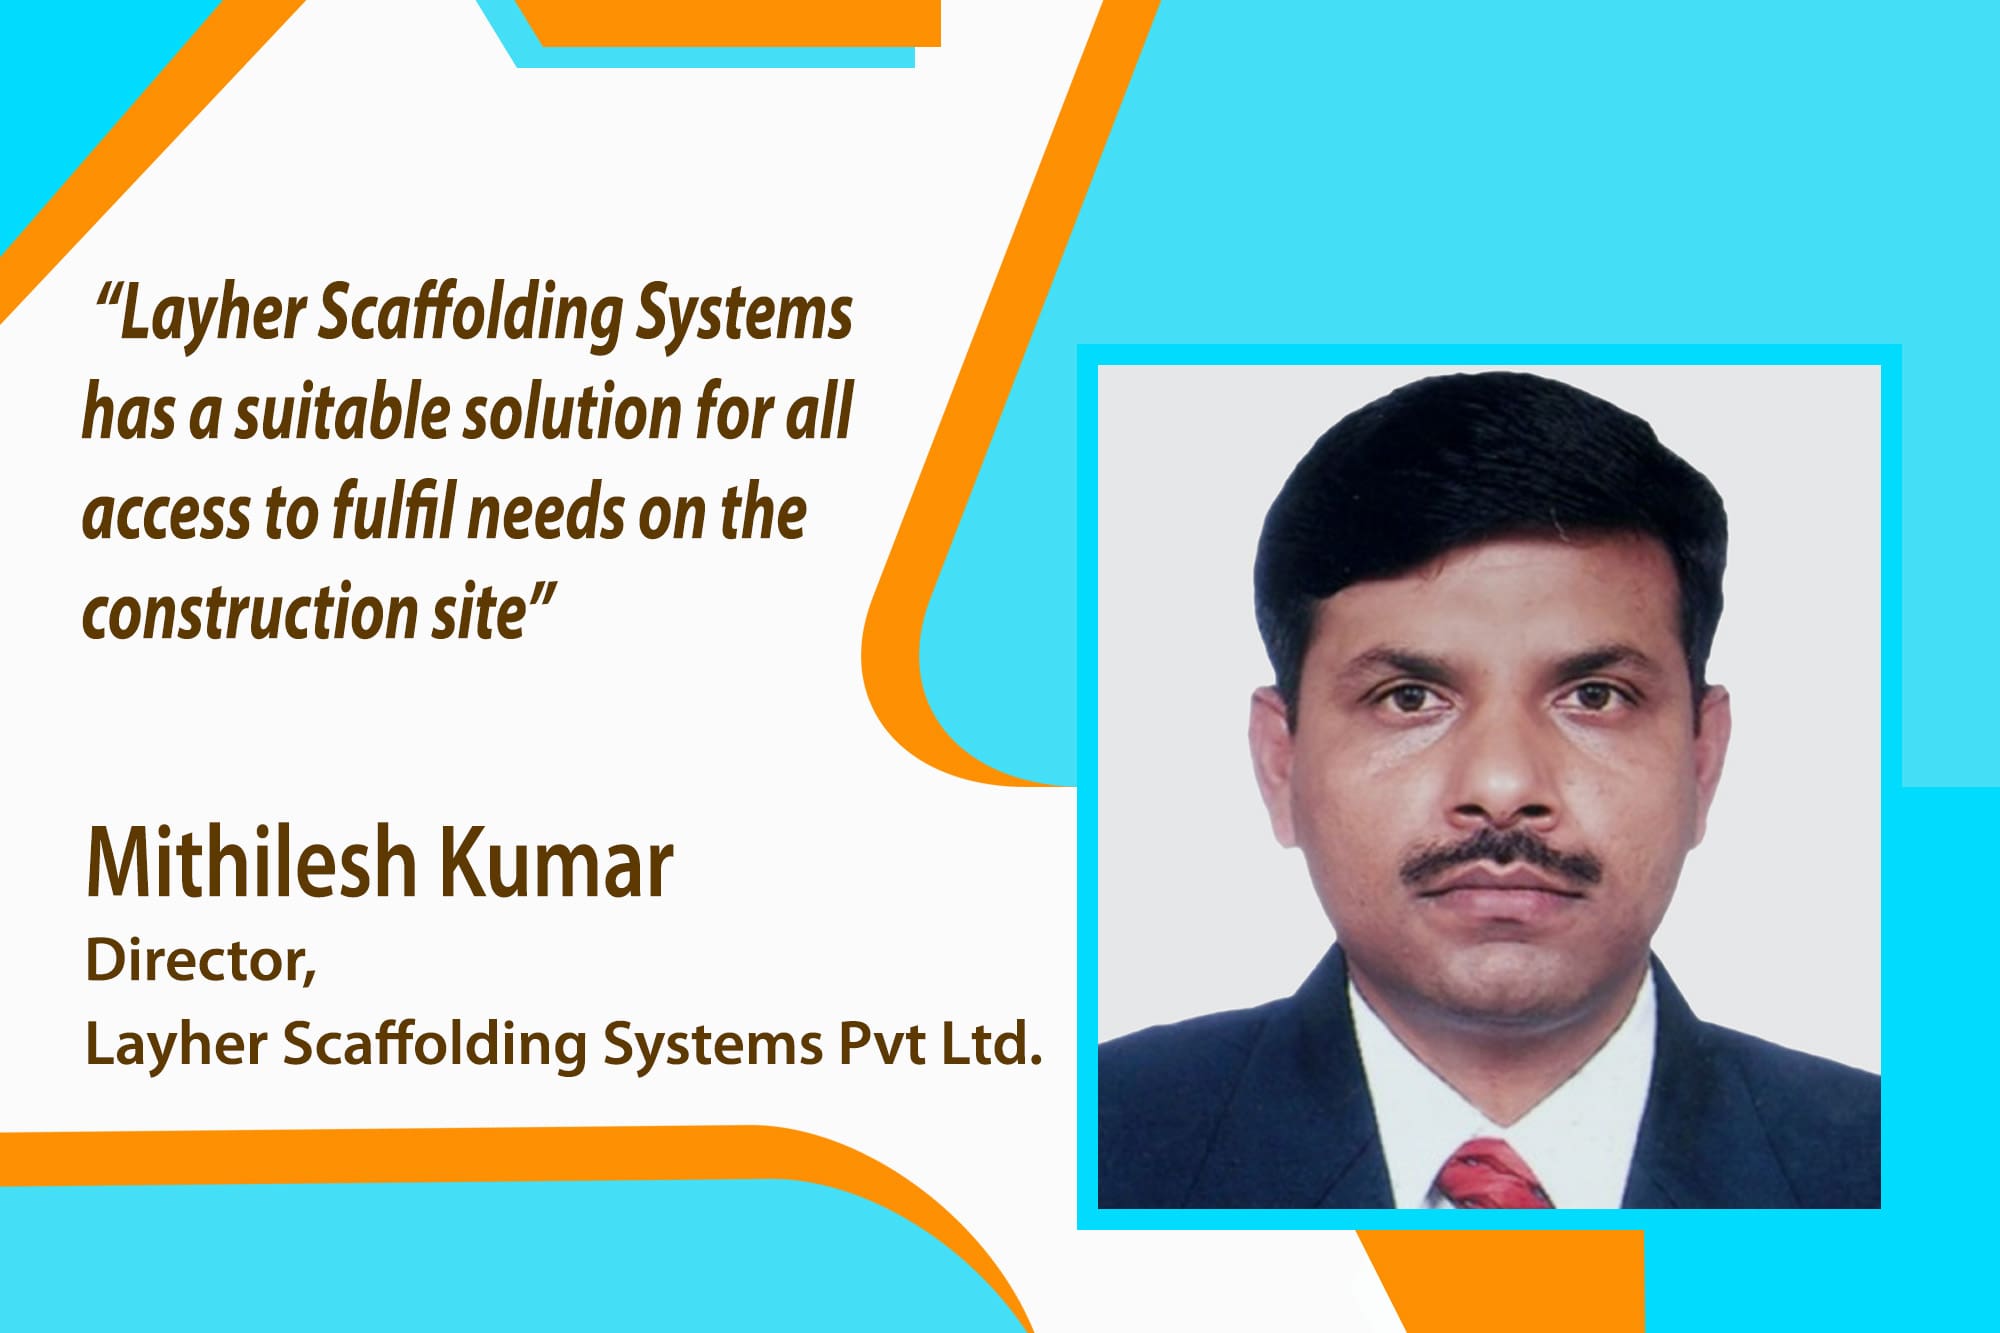 The ideal scaffolding system for the construction of high-rise building Layher has been a stalwart in the scaffolding industry for over seven decades, delivering top-notch systems globally. With a presence in more than 45 countries, Layher's commitment to innovation, technical prowess, and customer-centric services has elevated it to scaffolding excellence. Mithilesh Kumar, Director, Layher Scaffolding Systems Pvt Ltd Quote : Layher Scaffolding Systems has a suitable solution for all access to fulfil needs on the construction site For more than 75 years, Layher has produced high-quality scaffolding systems. Layher has a worldwide presence with more than 45 sales subsidiaries. Industries like construction, chemical plants, power plants, shipyards, refineries, and offshore are using the products. Due to innovative products, superior technical solutions, and Layher’s absolute customer-orientated service package, Layher has become the standard in scaffolding systems worldwide. More possibilities - Layher products and services Layher's present product characteristics and services help customers achieve long-term success and increase the profitability of their companies. Layher Scaffolding has been established as a synonym for modular scaffolds on the market. The Allround and SpeedyScaf Scaffolding offers unsurpassed versatility for construction sites, the chemical industry, power plants, aircraft, shipyards, the event sector, theatres and arenas. Layher scaffolding uses a simple, unique and bolt-free connection technology. Sliding the wedge head over the rosette and inserting the wedge into the opening immediately secures the component. There is still sufficient play to secure the other end of the ledger. A hammer blow to the wedge transforms the loose connection into a strong, structurally rigid one. The face of the wedge head is now precisely positioned against the standard. To transfer pulling force, every frame is secured by locking pins or bolts to each other. This way, the tower can be assembled on the ground and placed by crane. The scaffolding around the new office/business/apartment complex using SpeedyScaf equipment from Layher was “roundly” praised. Application of Layher Scaffold for high-rise building The Construction of a Façade Scaffold about 90 metres high is the big challenge of this project (Construction of Residential Building) into the sky. The skyscraper also lives up to its name. The corner and projected balcony of the building is the challenge of this project. During the construction, the biggest challenge was posed by the recessed balconies on every second side of the building. Providing scaffolding around these drew on all the scaffolding erectors' experience and the Systems' flexibility. But this problem, too, was quickly overcome with special structures. Attach the necessary anchoring continually as the scaffolding assembly progresses. Before starting the Construction of Scaffolding, we need to confirm the surface load-bearing capacity and lay a suitable load-distributing base. These bases must extend over both uprights. When positioning, stay within the maximum clearance from the wall; otherwise, there is the risk of falling. Following the design is sometimes difficult due to site conditions; stiffen the scaffolding with a vertical, diagonal brace. By bracing the work scaffolding vertically with SpeedyScaf lattice beams, even the increased wind loads could be transferred without putting unnecessary strain on the structure. With Layher SpeedyScaf Systems, the scaffolder had the ideal equipment for the economical provision of scaffolding around the façade of 90 metres. Easy assembly and using a hoist meant that the assembly time was just five weeks. Thanks to the outstanding quality of Layher's products, the lower assembly frames and the spindles can withstand enormous loads. The bearing capacity of individual spindles (baseplate) is subjected to a weight of up to 5 tons. Especially on irregular designs due to different corner sizes, the Allround/Speedyscaf Scaffolding impresses with its flexibility and safe and easy handling. With its advantages like screw-less quick and self-explanatory assembly, form-fitting and solid connection, dimensional stability and rigidity, scaffolders quickly create safe workspaces for the following assembly sections, even in the highest altitudes – and under high loads. After all, heavy stones have to be stored temporarily on the scaffold during the Construction/renovation. Layher is the leading scaffolding company on the market right up to today, its extensive range of parts makes even round scaffolding quick to build. To do so, the scaffolding experts chose short bay lengths to comply with the permitted wall clearances, individually positioning every bay at the appropriate angle – connected to a coupler on the inner standard. This allowed even structures with widely varying radii to be enclosed with scaffolding. Layher Scaffolding Systems has a suitable solution for all access to fulfil needs on the construction site. Access Landing type stairway towers (External Access/Robust Access deck with ladder (internal access) for a broad spectrum of applications and requirements are created at the site for the hoisting of concrete buckets and passenger hoist and to accommodate and safe Modular Stairway/Access modular, accesses that always fit and that match the system can be constructed [(replacement traditional scaffolding) huge quantities of scaffolding pipes and clamps) are possible by using Allround Scaffold Systems. The load classes regulate the live load and dead load (theoretical load) on scaffolding, which must match the type of work to be performed. All live load effects must be considered separately, and effects must be superimposed. The system-based advantages of Layher Scaffolding have proven it to be the more economical solution in all fields of scaffolding use (industrial construction, power station, shipbuilding, facade work, construction sites, stair towers, suspended scaffolding structures, aircraft maintenance, sub-structure for podiums and stands, theatre scenery and trade fare construction as well as for strong shoring and support structure)